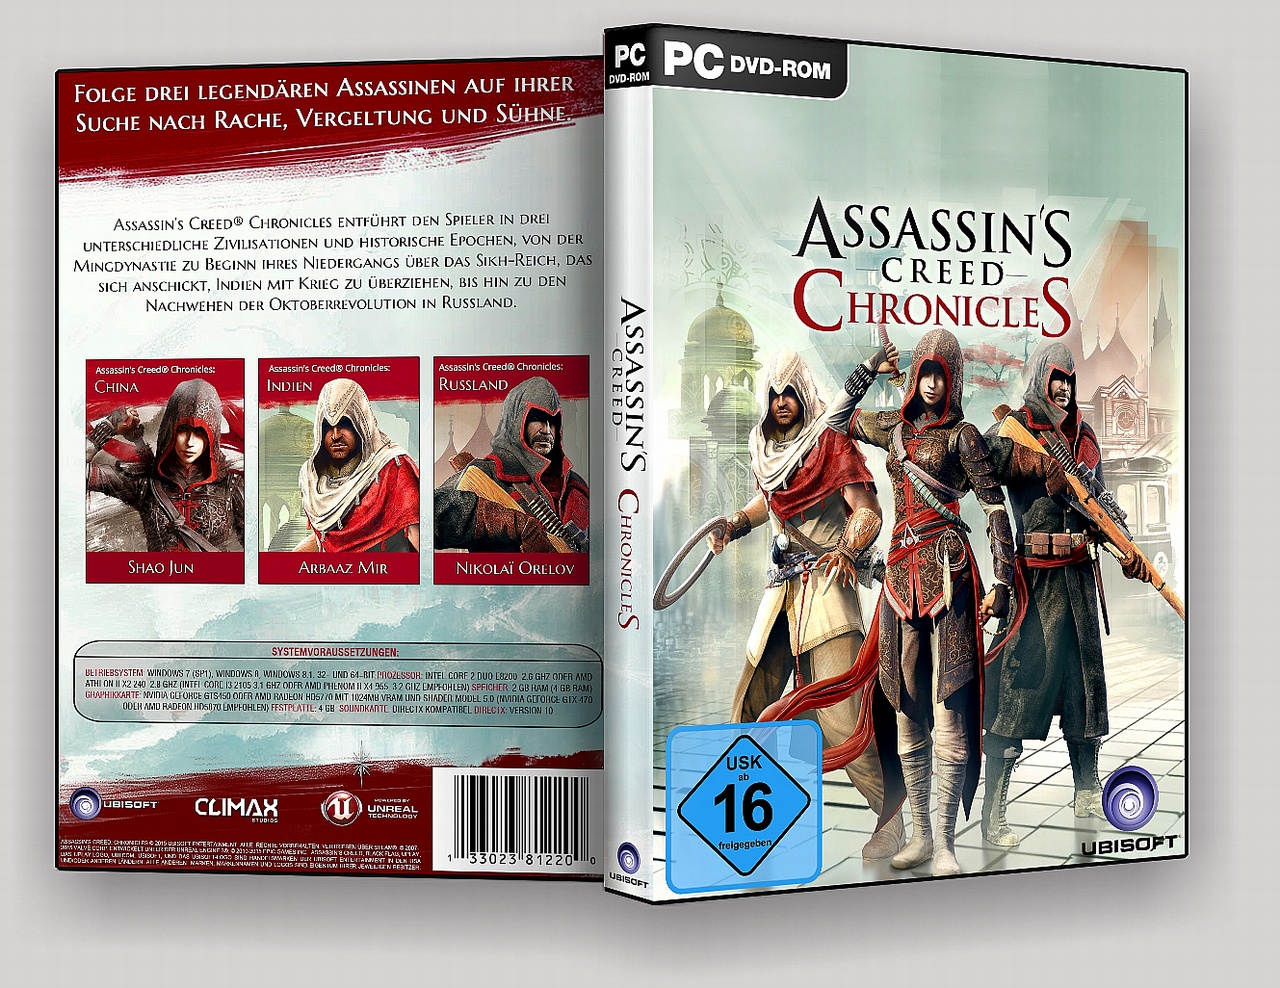 Assassin's Creed: Chronicles box cover